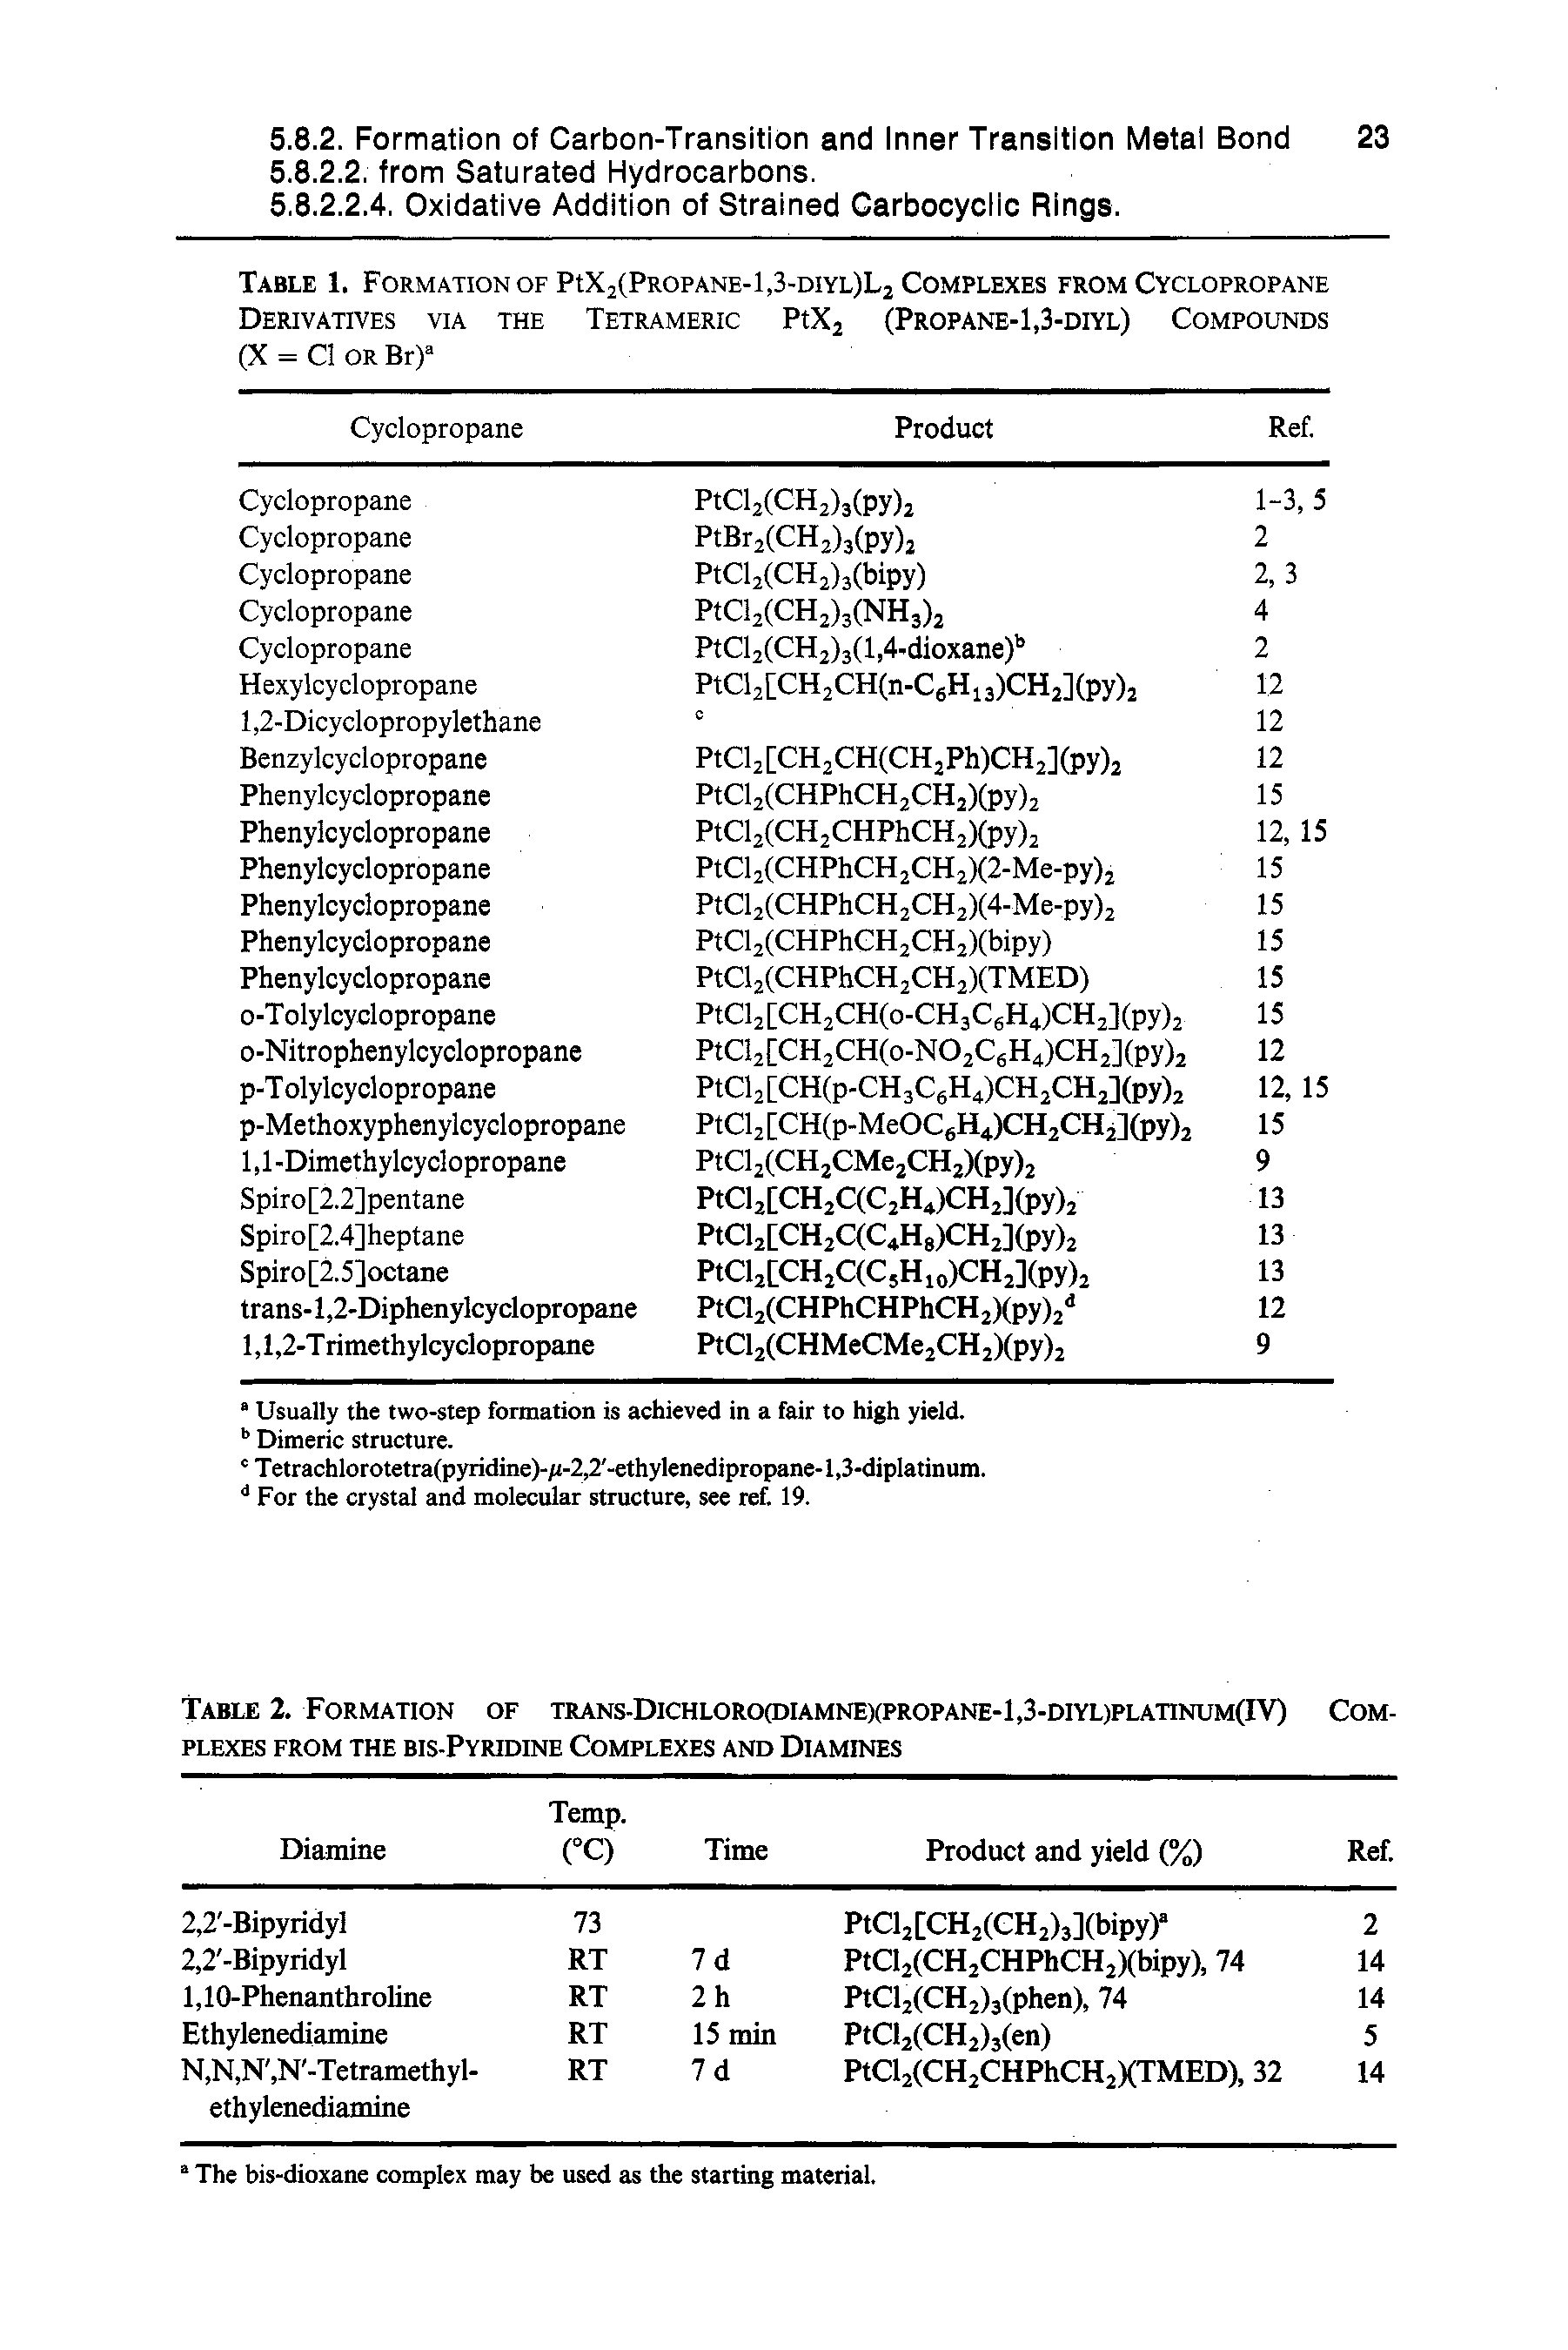 Table 2. Formation of trans-Dichloro(diamnexpropane-1,3-diyl)platinum(IV) plexes from the bis-Pyridine Complexes and Diamines...